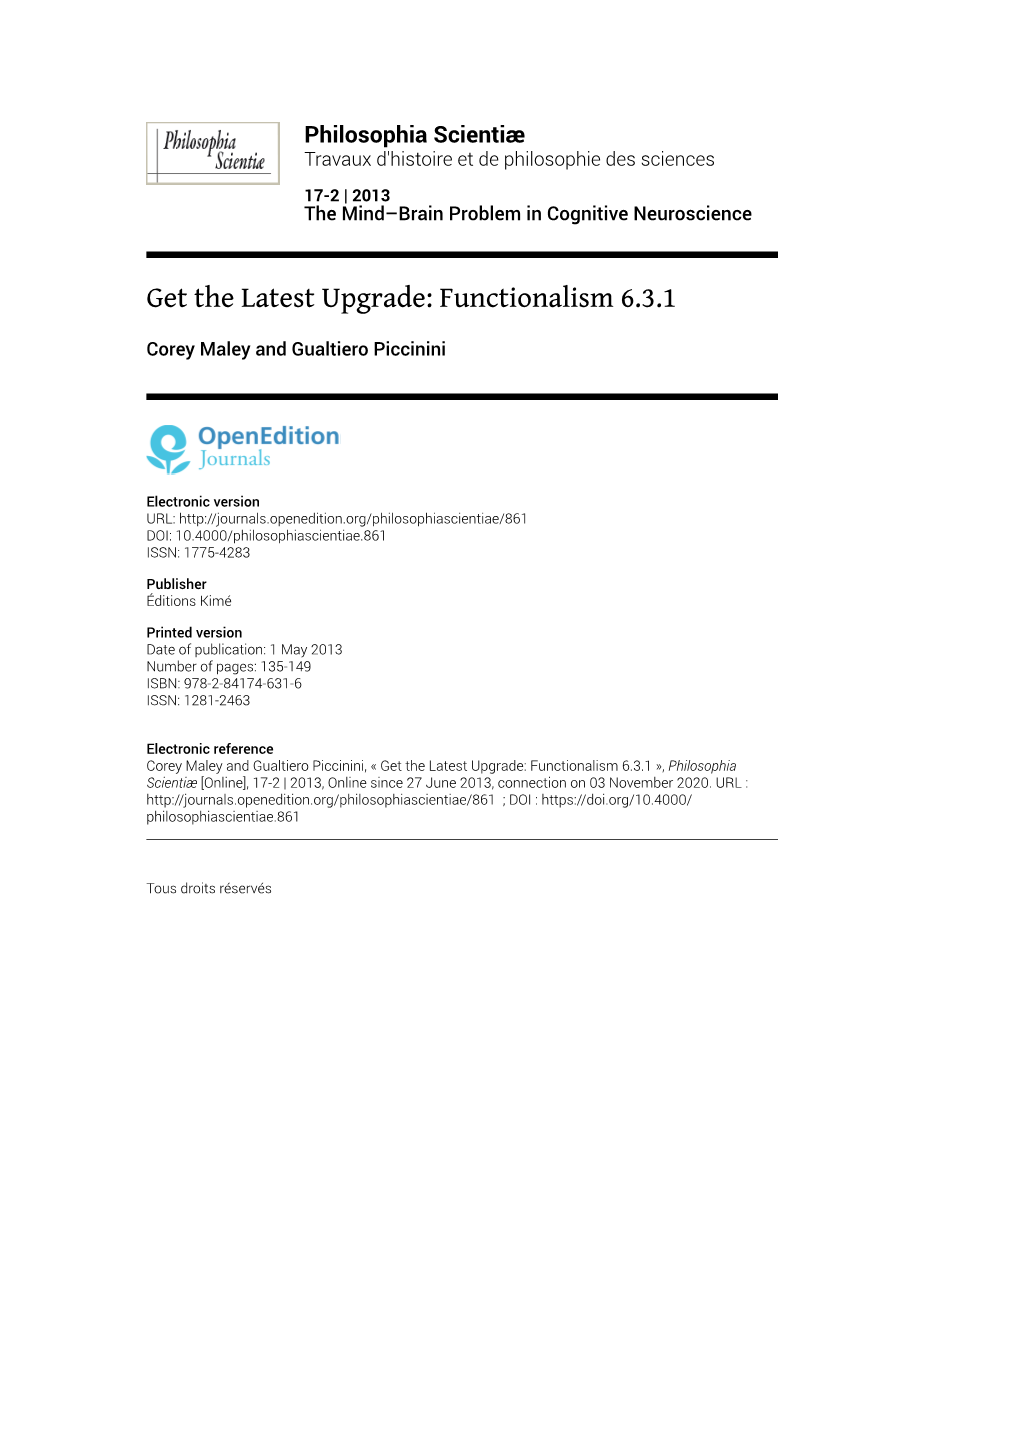 Get the Latest Upgrade: Functionalism 6.3.1